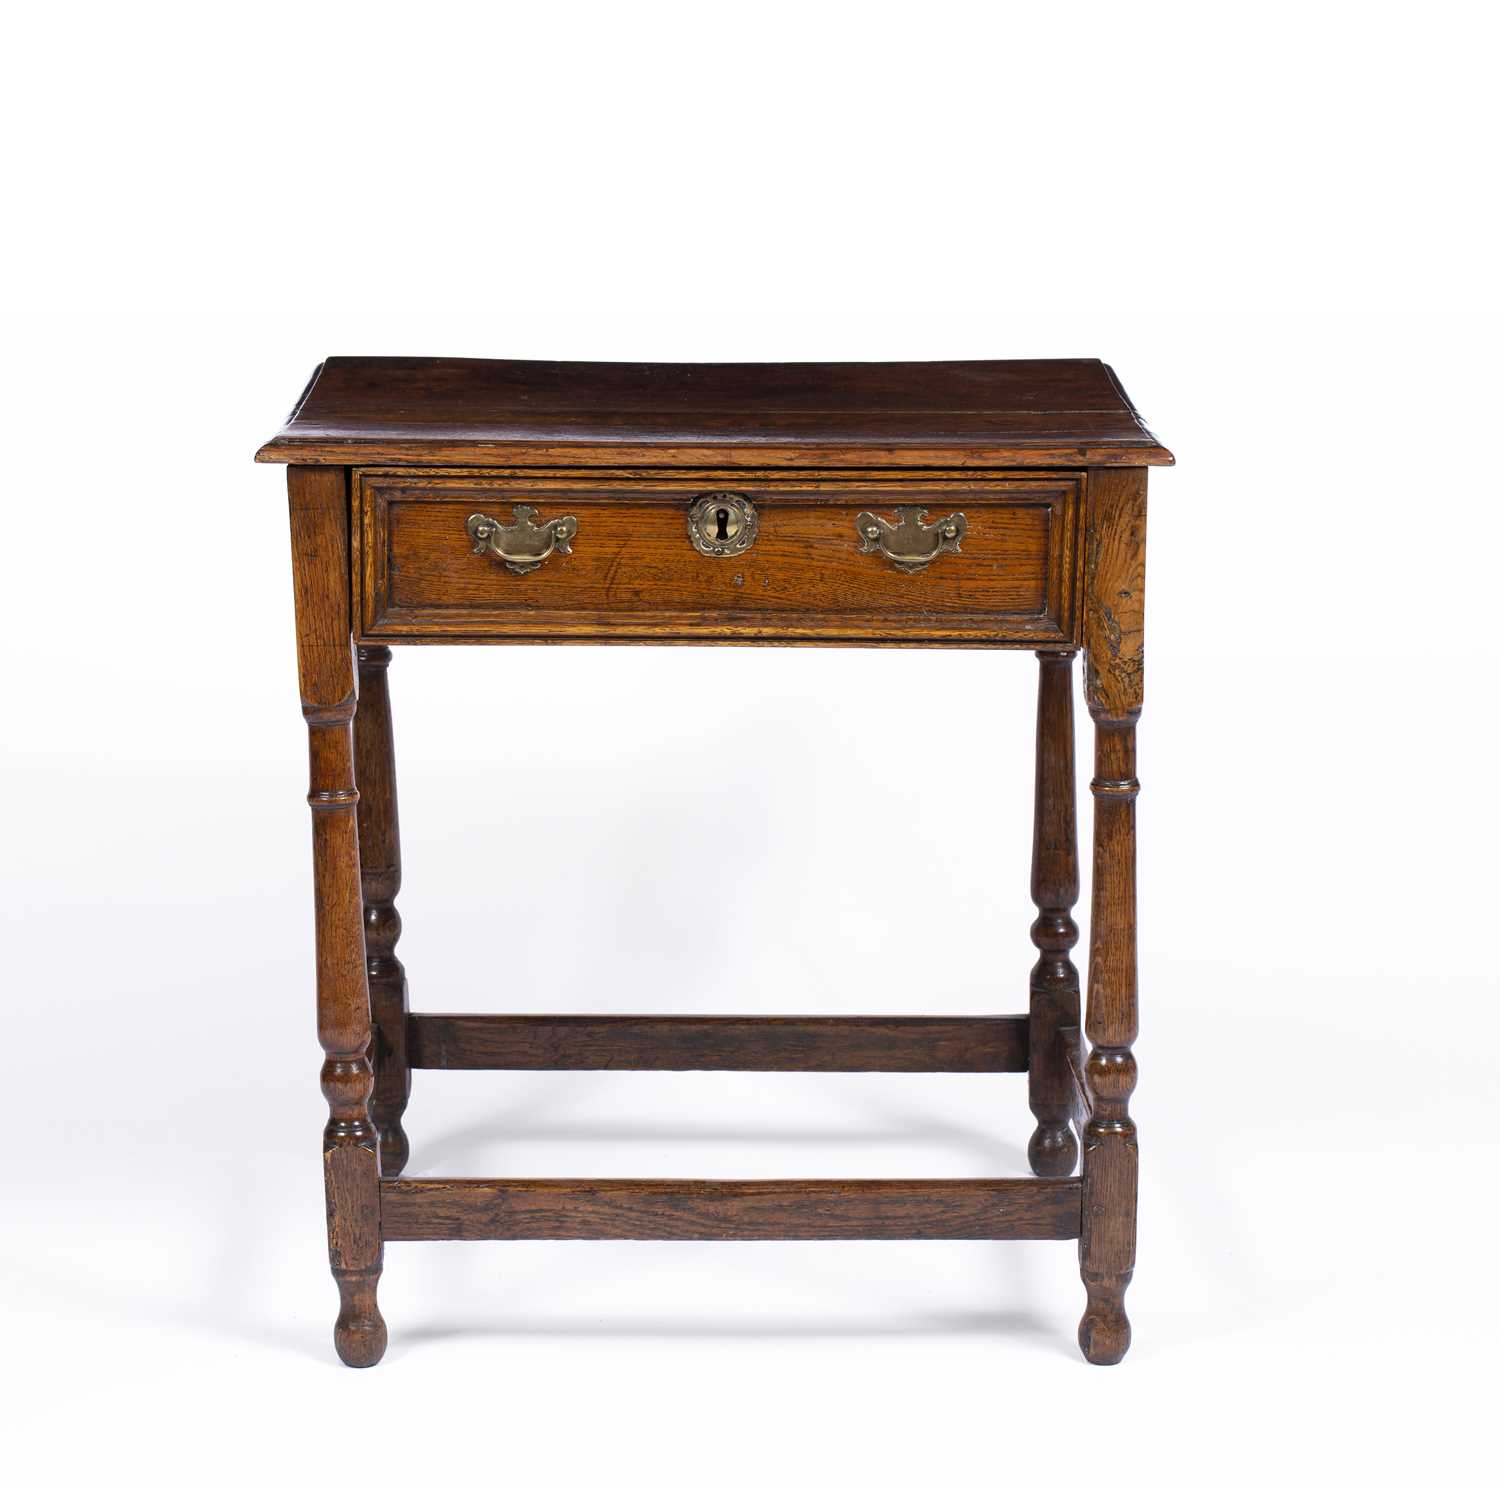 An 18th century oak single drawer side table with turned supports, 61cm wide x 47cm deep x 64cm